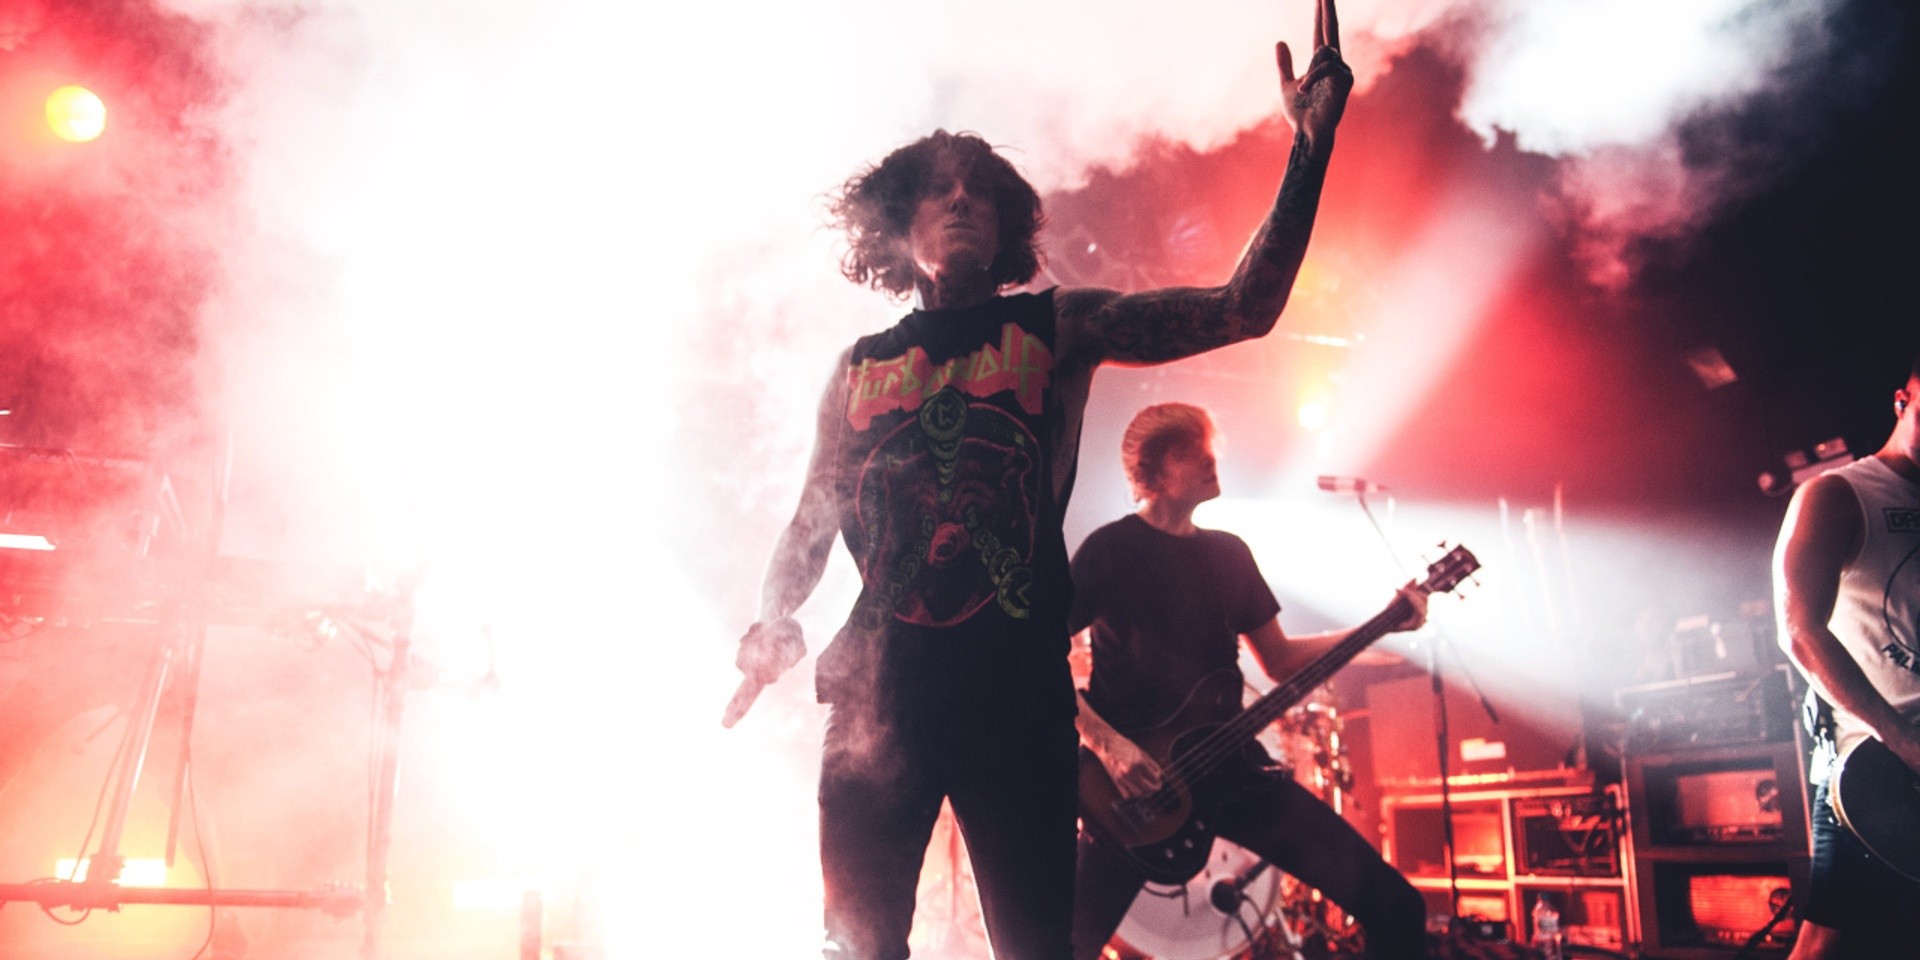 Bring Me The Horizon announces new date for Singapore show